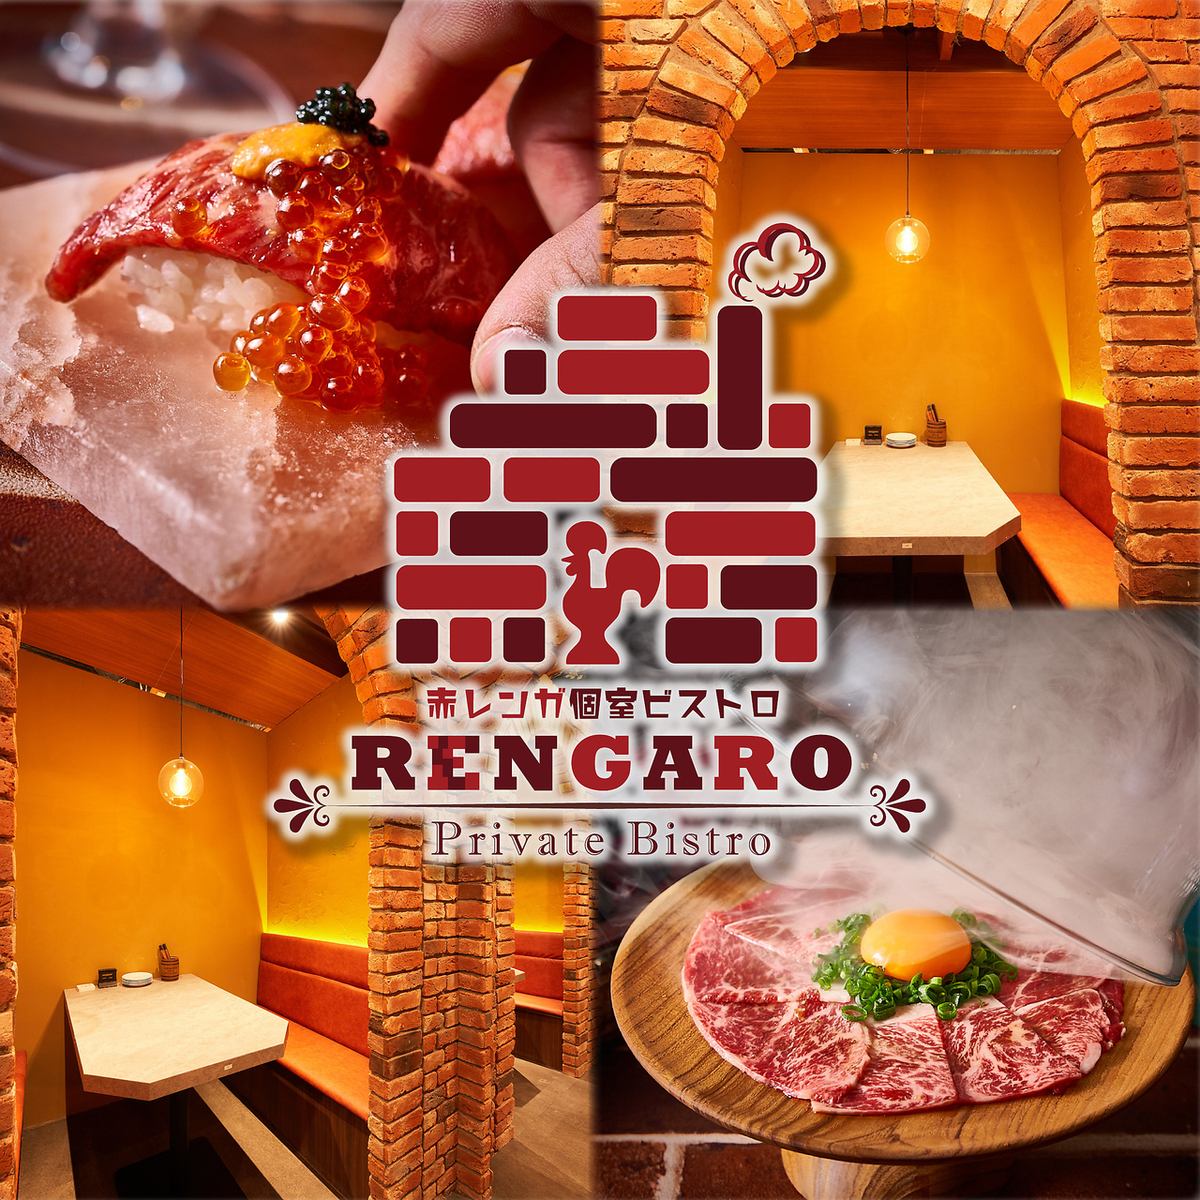 Good location near Machida Station! All seats are red brick private rooms ◎ Bistro cuisine created by the hotel chef ◎